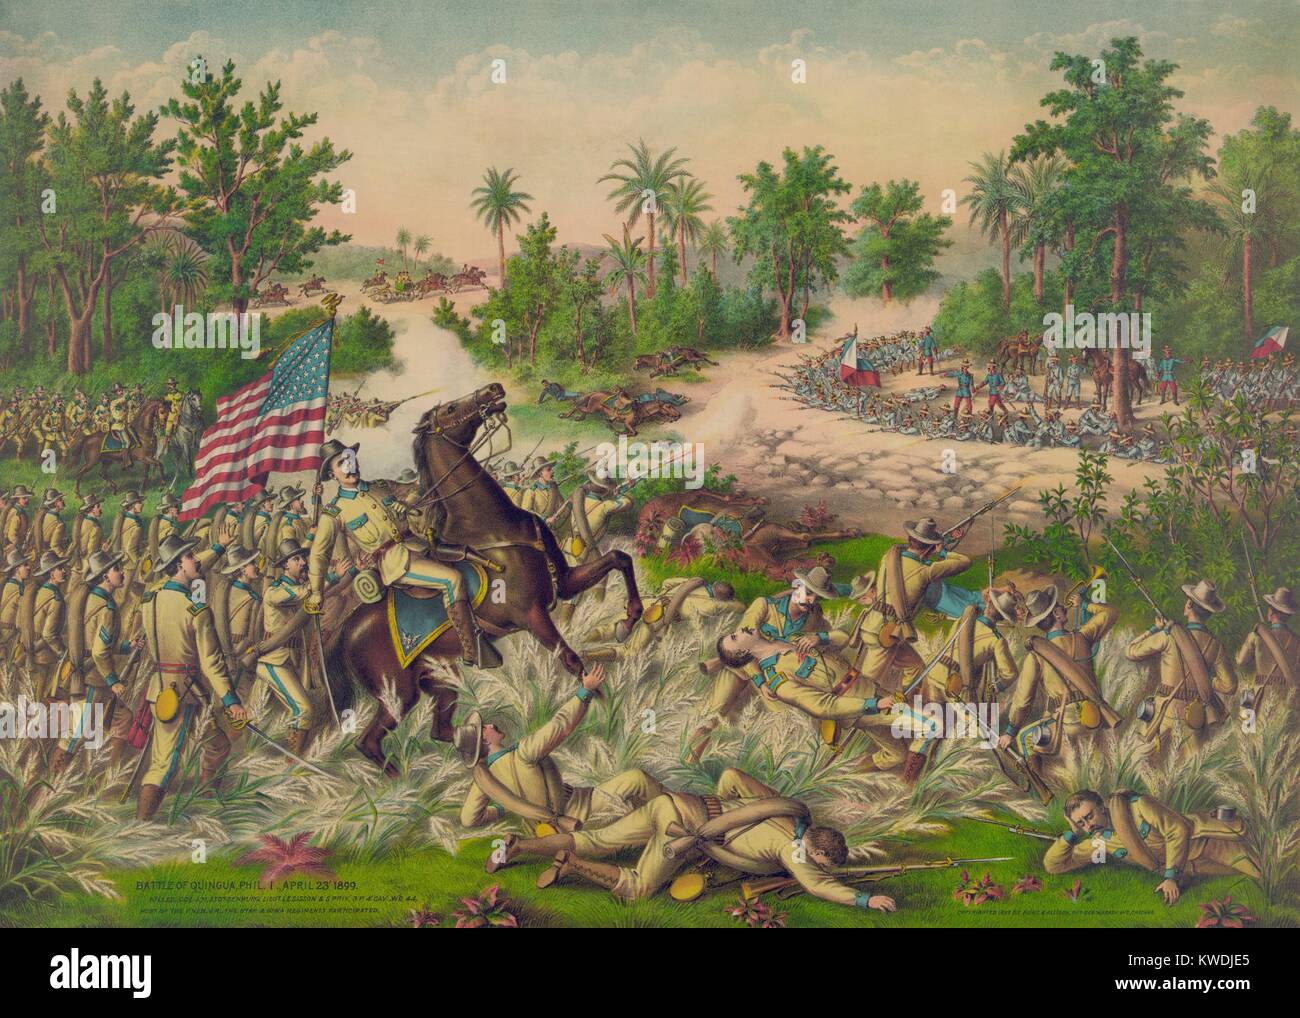 American troops advancing on Filipino troops behind earthworks at the Battle of Quingua. Philippine-American War, April 23, 1899. American troops are fired on by Filipino troops behind earthworks, killing Col. John M. Stotsenburg, who falls from his horse. The Filipinos forced the US soldiers to retreat (BSLOC 2017 10 80) Stock Photo